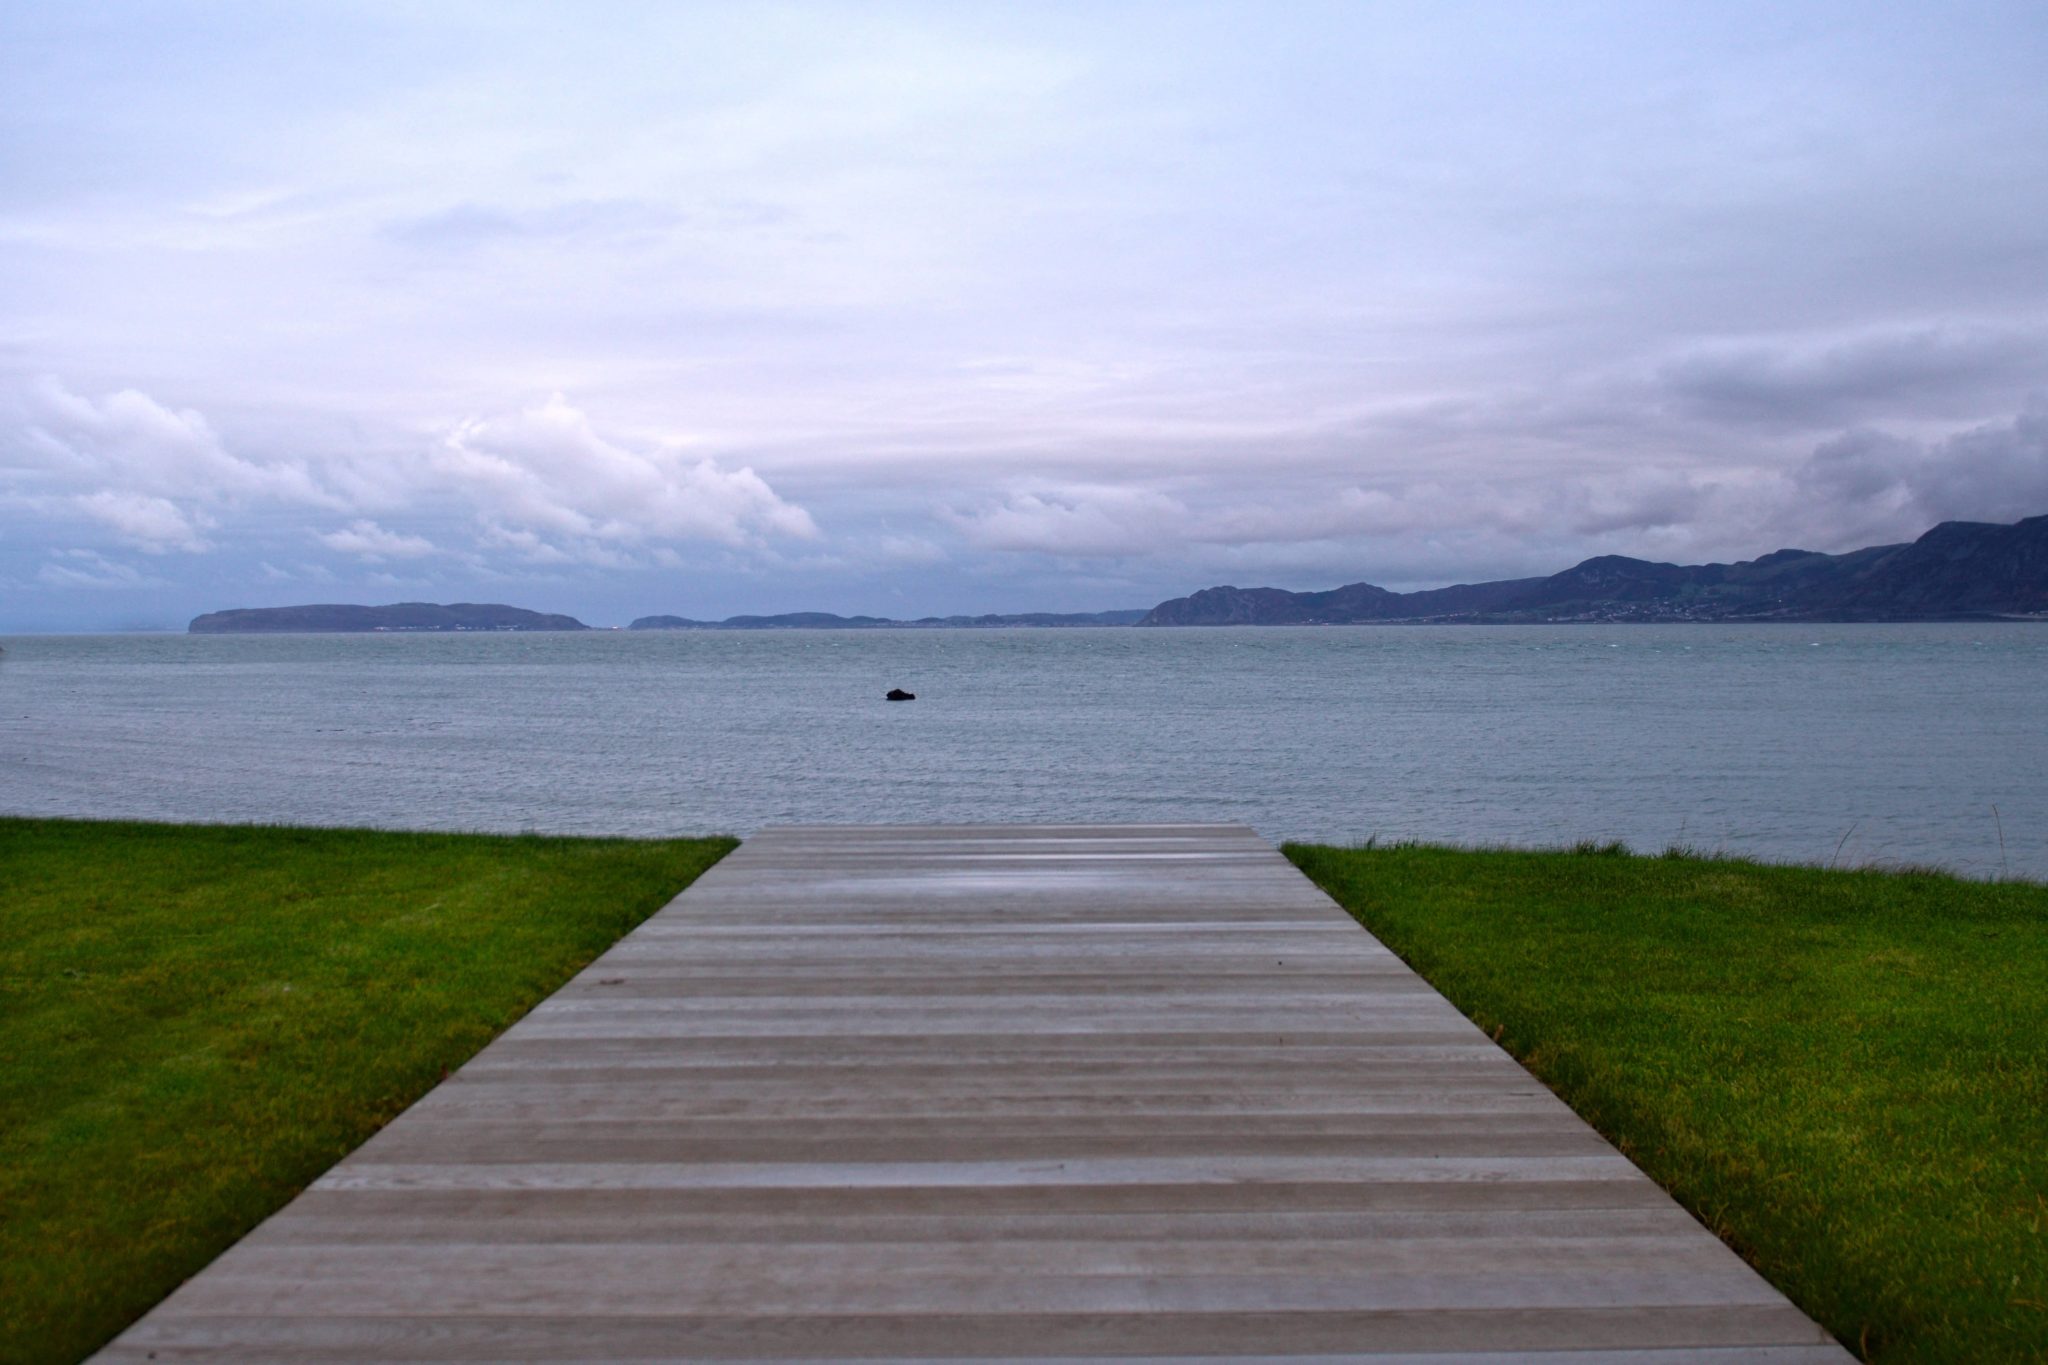 a wooden walkway leading to a body of water.